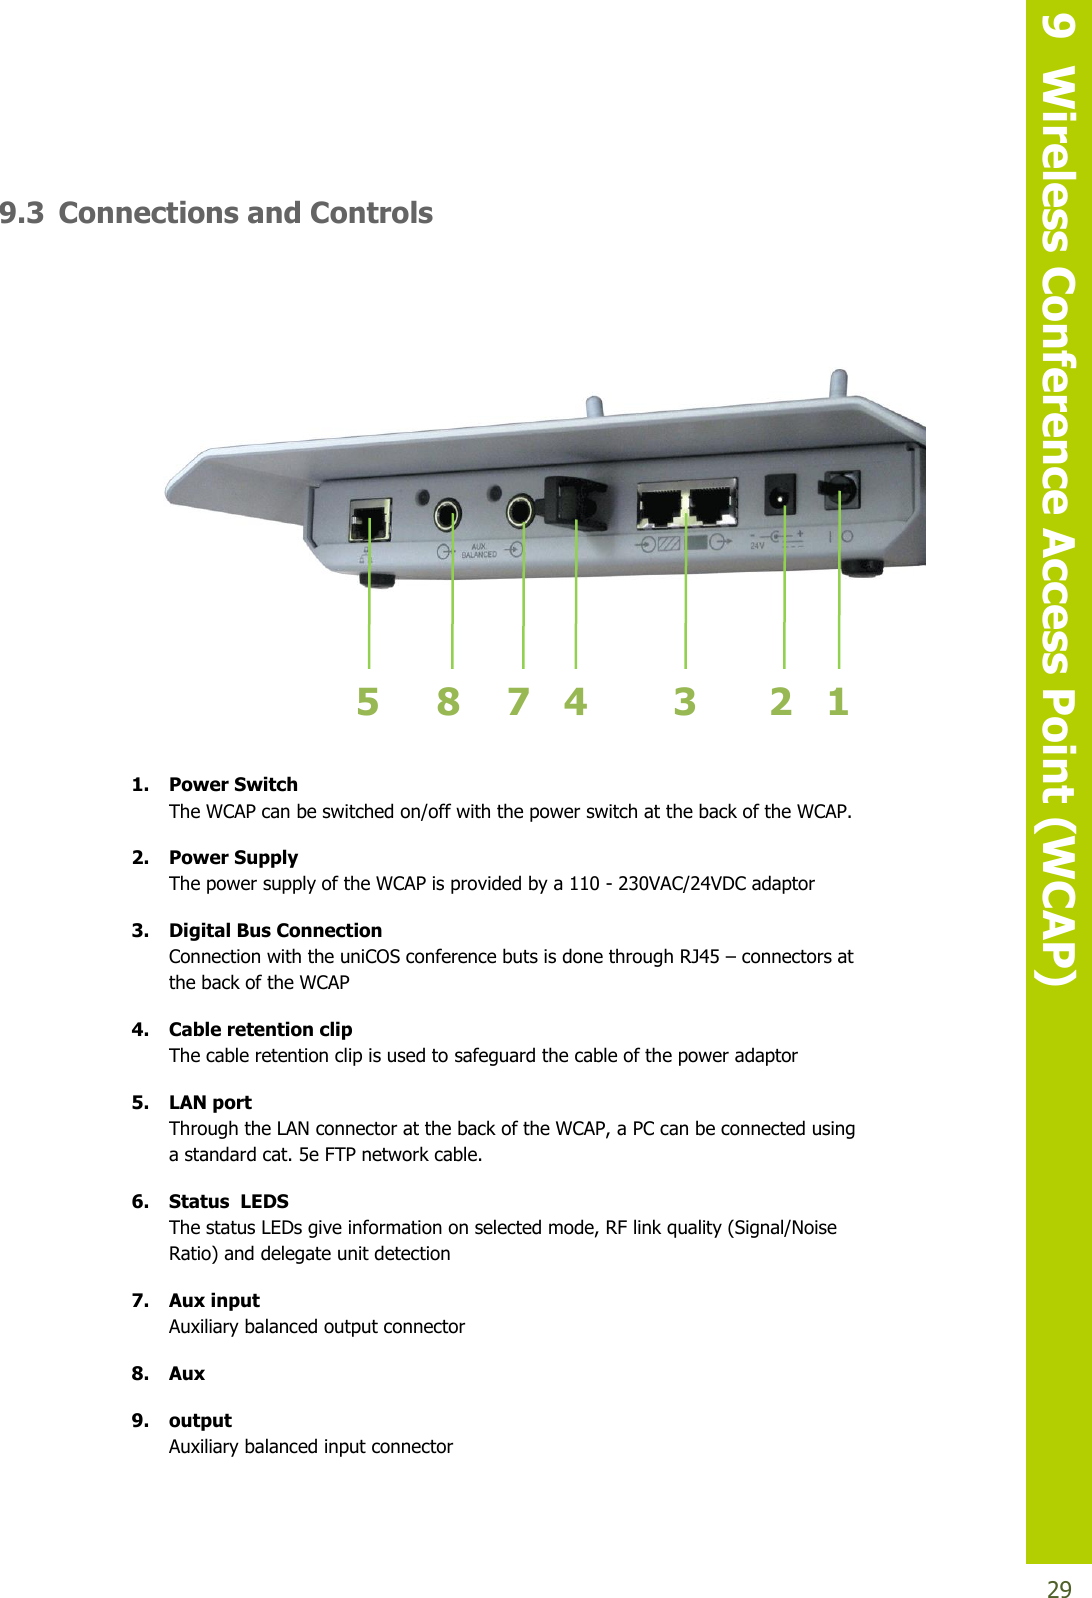   9  Wireless Conference Access Point (WCAP)  29  9.3 Connections and Controls                                       1. Power Switch The WCAP can be switched on/off with the power switch at the back of the WCAP. 2. Power Supply The power supply of the WCAP is provided by a 110 - 230VAC/24VDC adaptor 3. Digital Bus Connection Connection with the uniCOS conference buts is done through RJ45 – connectors at the back of the WCAP 4. Cable retention clip The cable retention clip is used to safeguard the cable of the power adaptor 5. LAN port Through the LAN connector at the back of the WCAP, a PC can be connected using a standard cat. 5e FTP network cable. 6. Status  LEDS The status LEDs give information on selected mode, RF link quality (Signal/Noise Ratio) and delegate unit detection  7. Aux input Auxiliary balanced output connector 8. Aux  9. output Auxiliary balanced input connector 2 1 3 4 5 8 7 